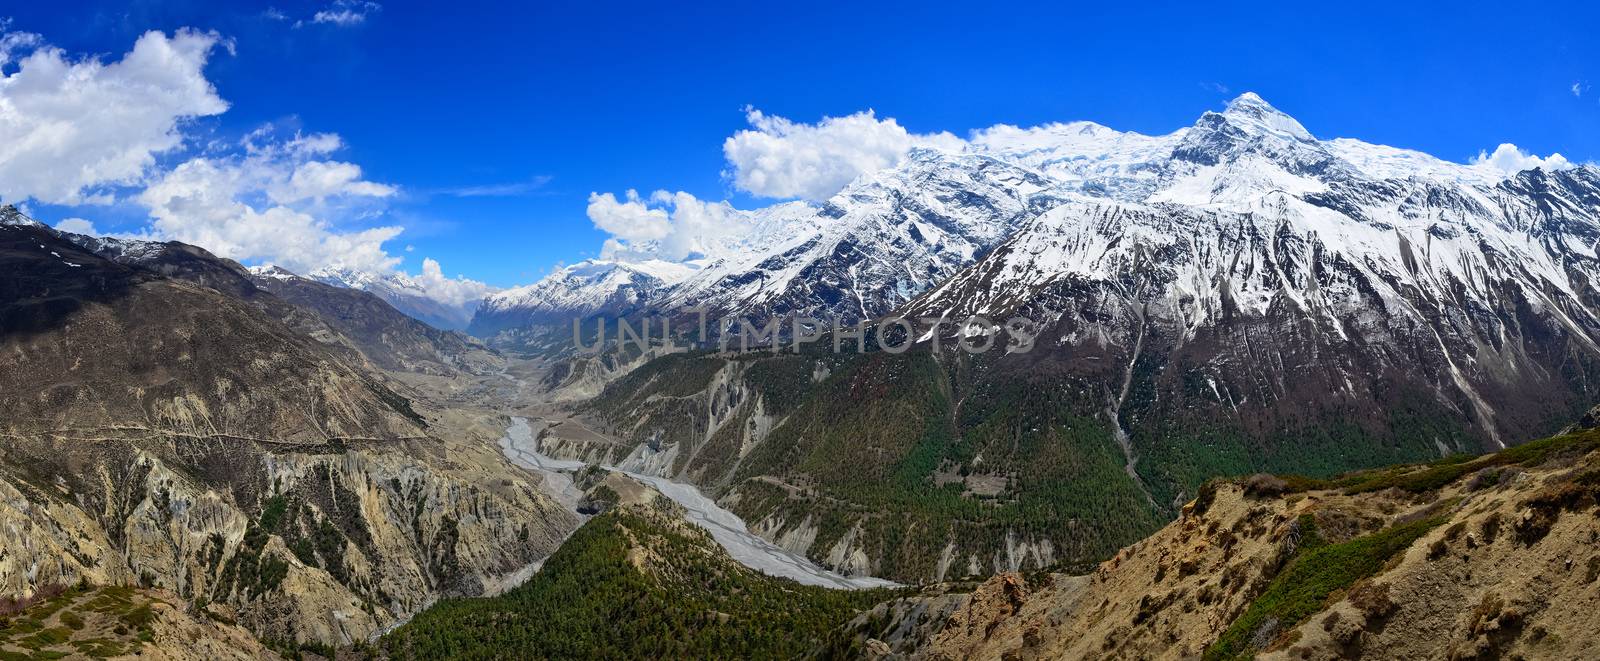 Himalayas mountains river valley panorama in Annapurna range by martinm303